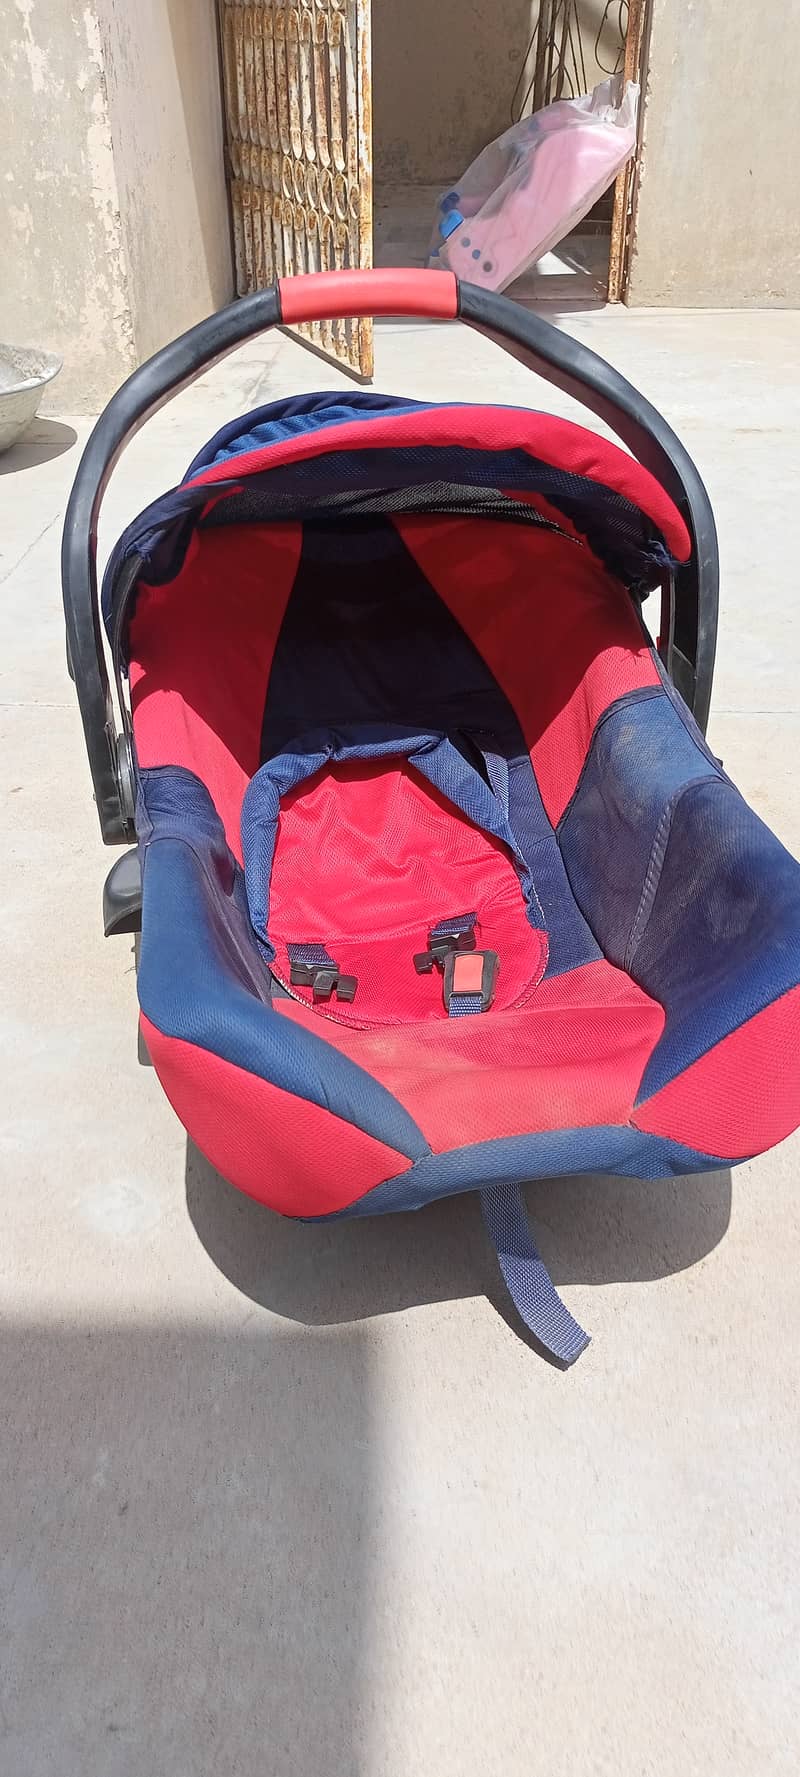 Twin baby stroller imported 6